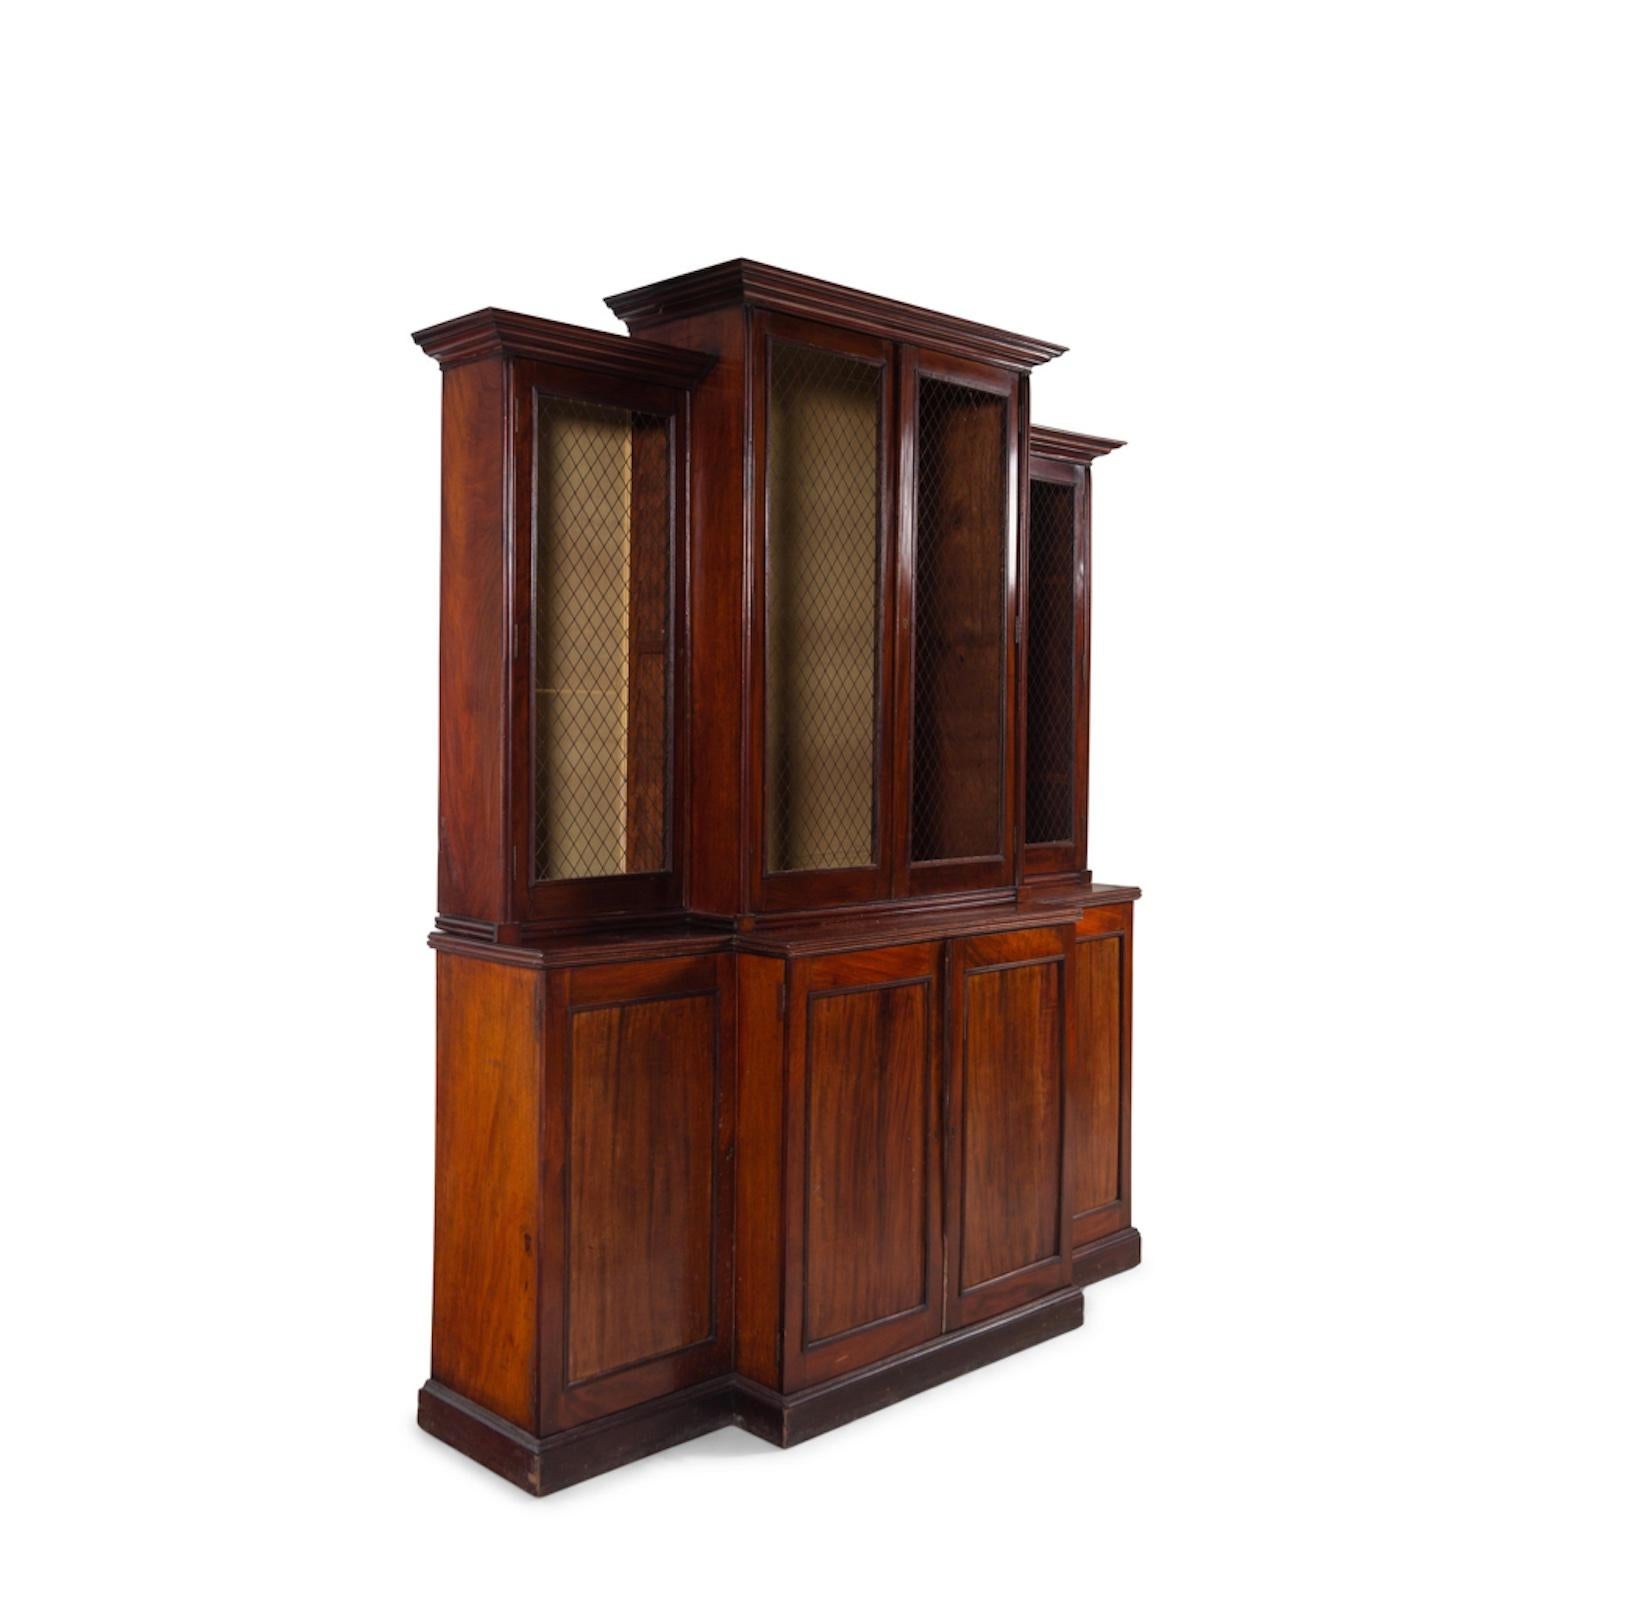 George III A Regency Mahogany Breakfront Bookcase 19th Century, Grilled Upper Doors. 1820 For Sale